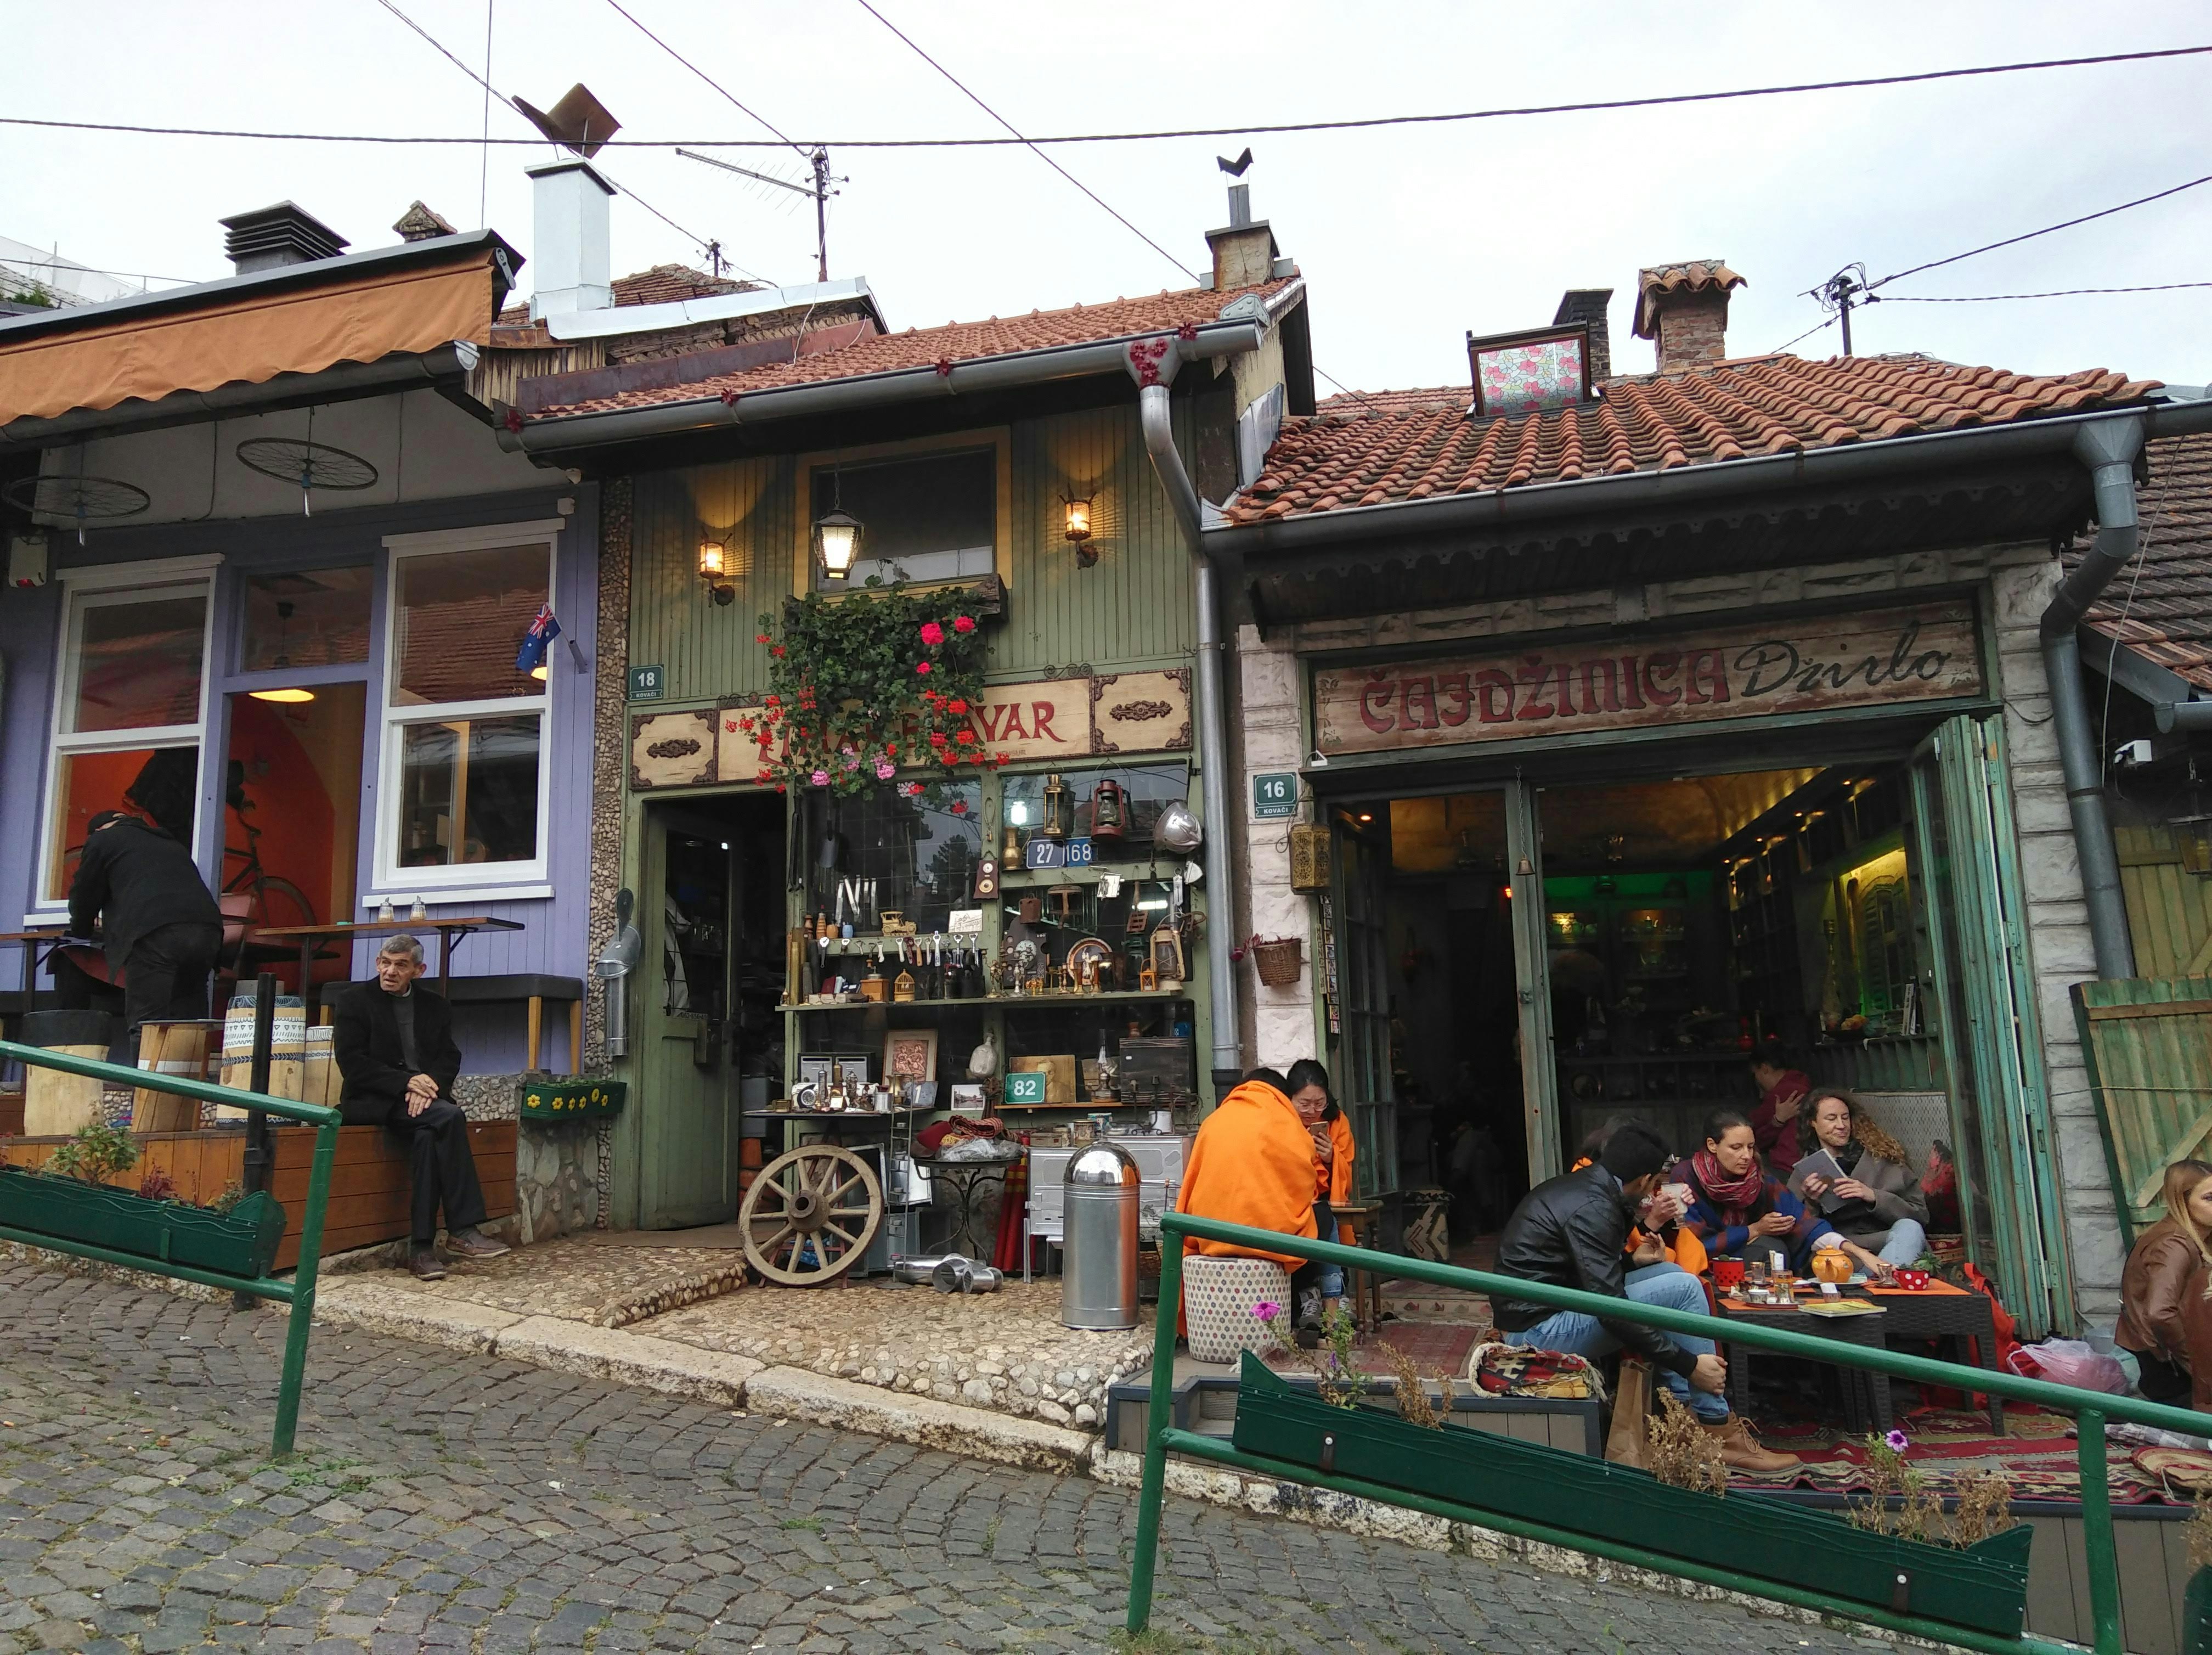 A group of people are sitting on tables outside a cafe on a quaint, hilly, cobbled street in Sarajevo. 